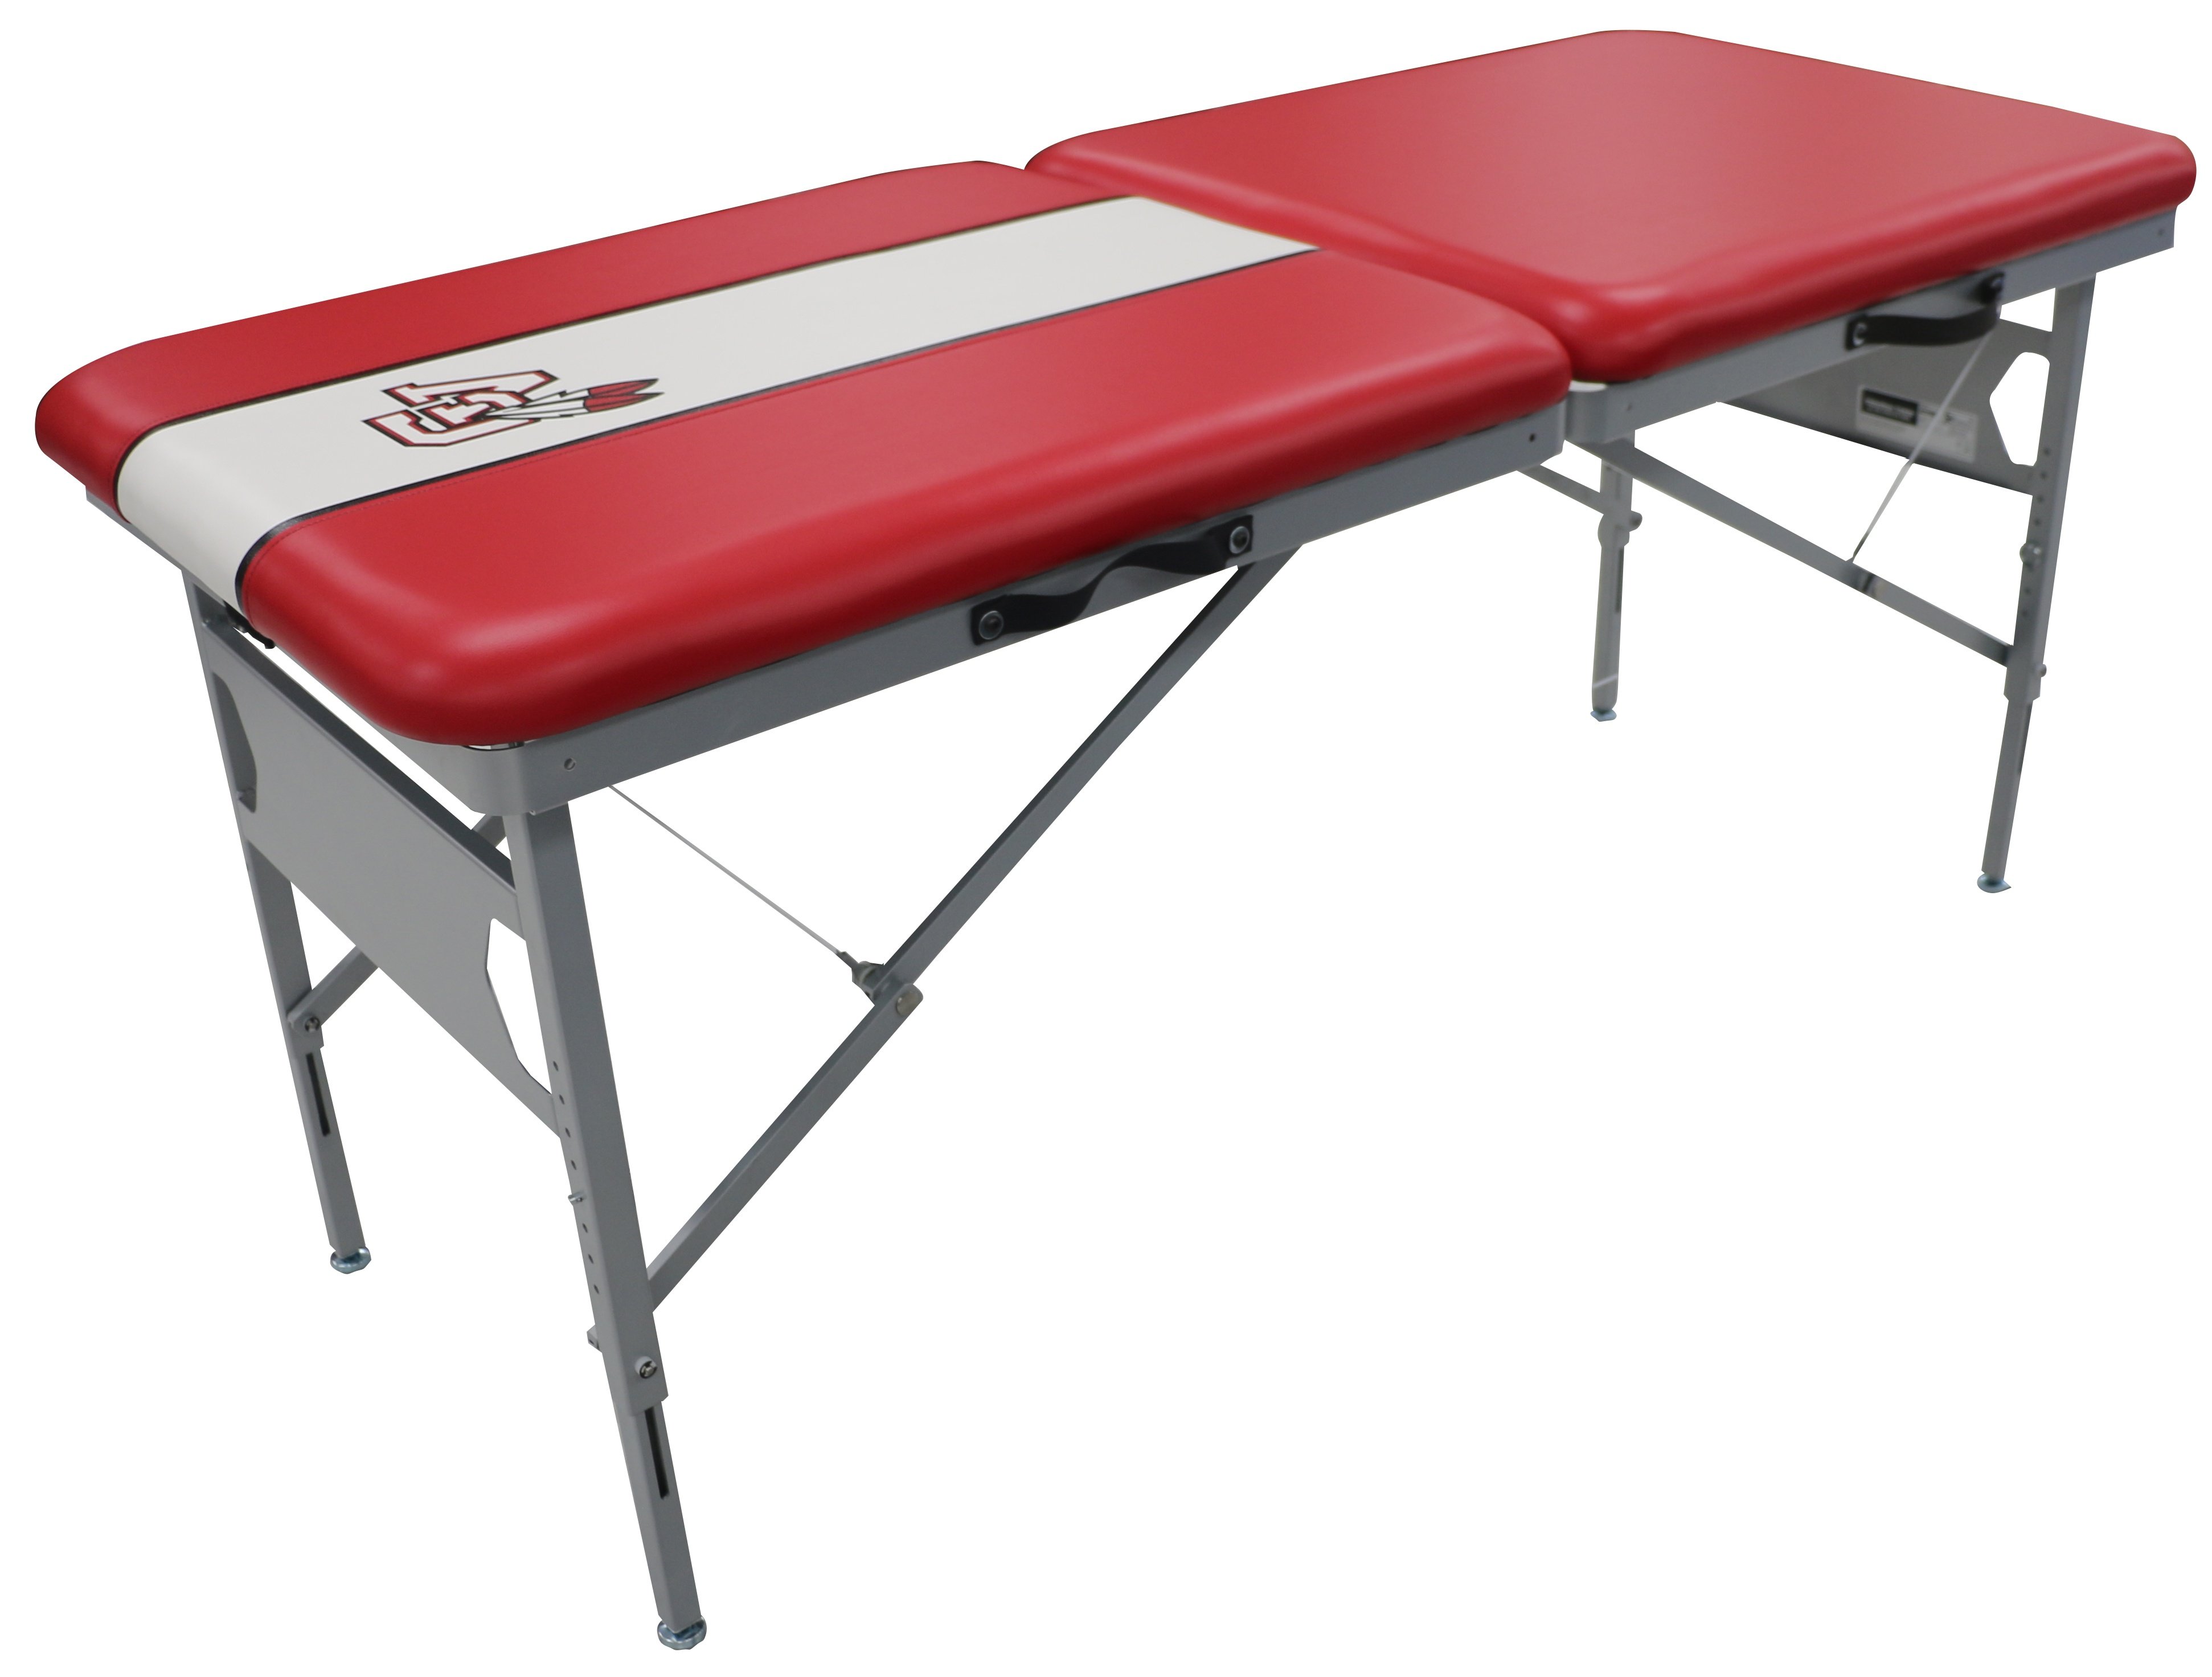 Chippewa Valley-(Portable Sideline Table)